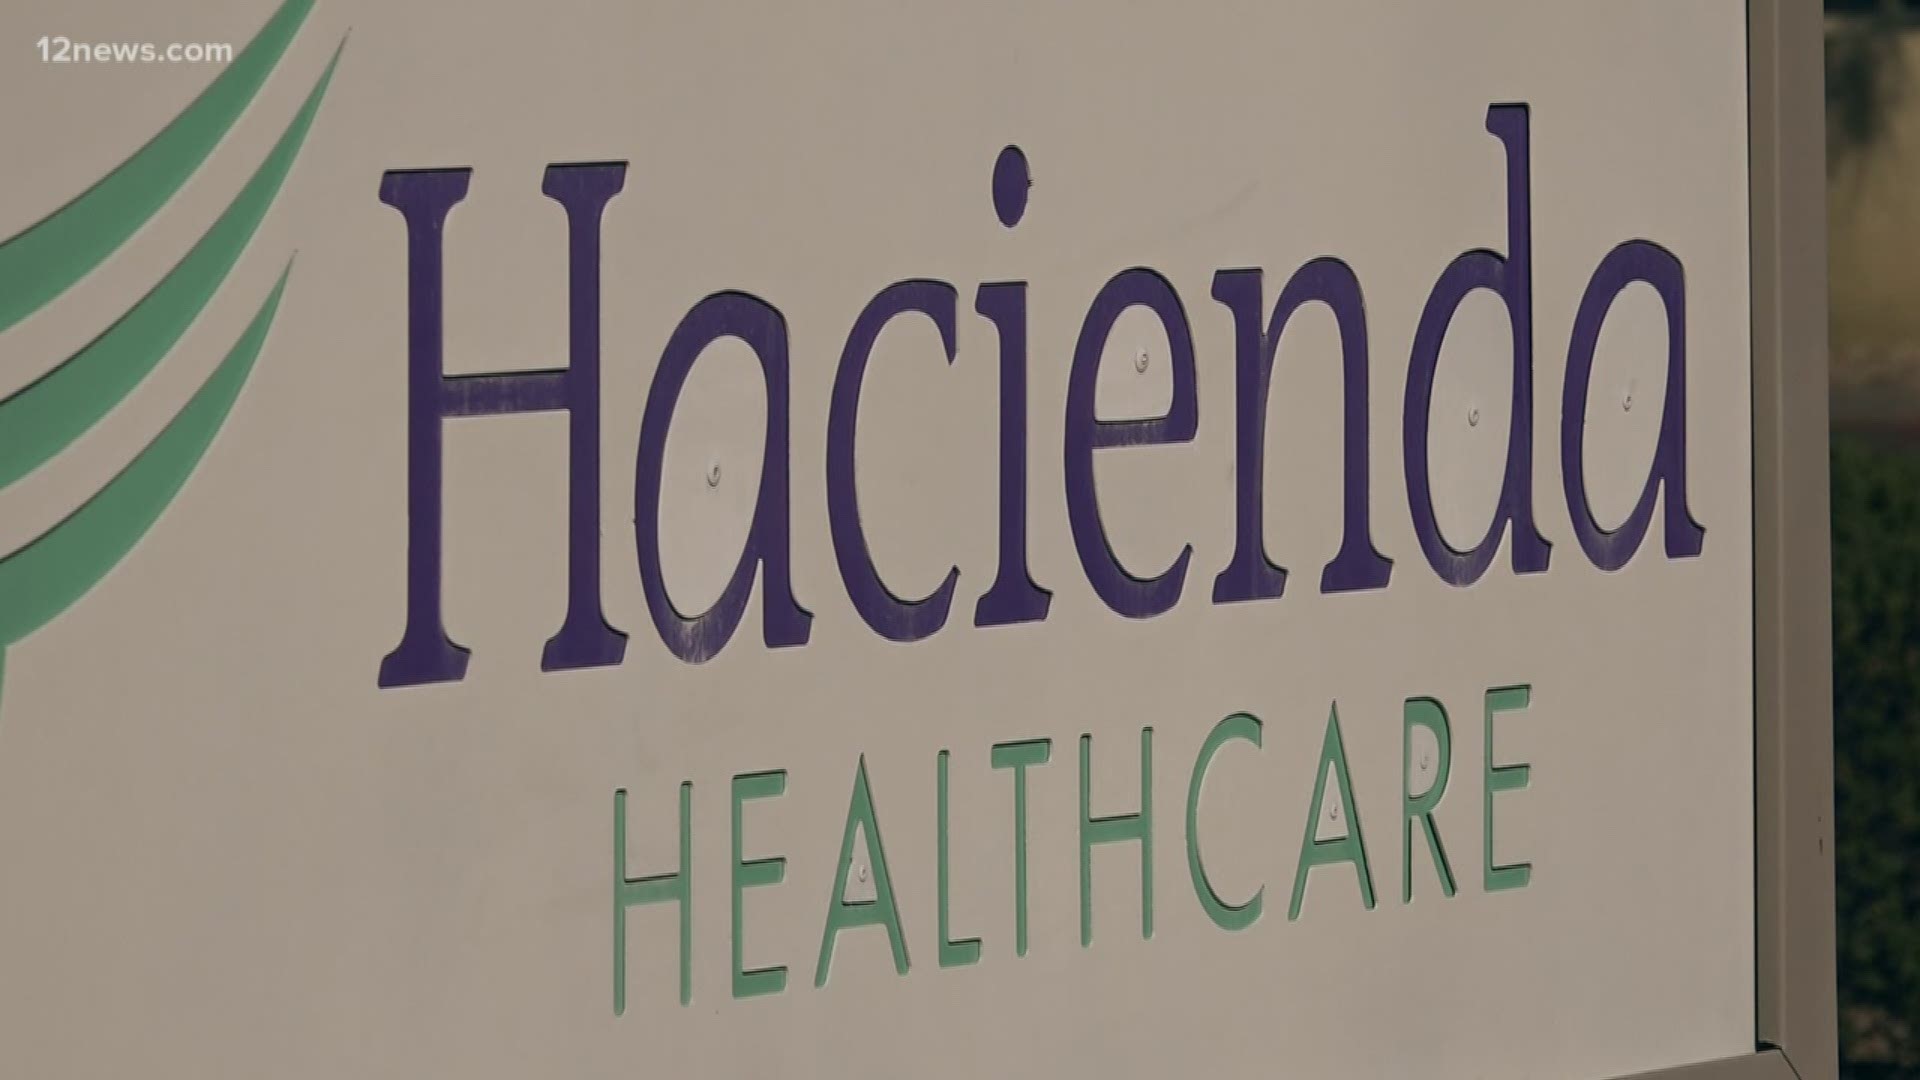 State regulators have ordered Hacienda Healthcare administer pregnancy and STD tests to all patients at the facility after a patient in a vegetative state gave birth last month. Security measures have also been increased to protect residents.